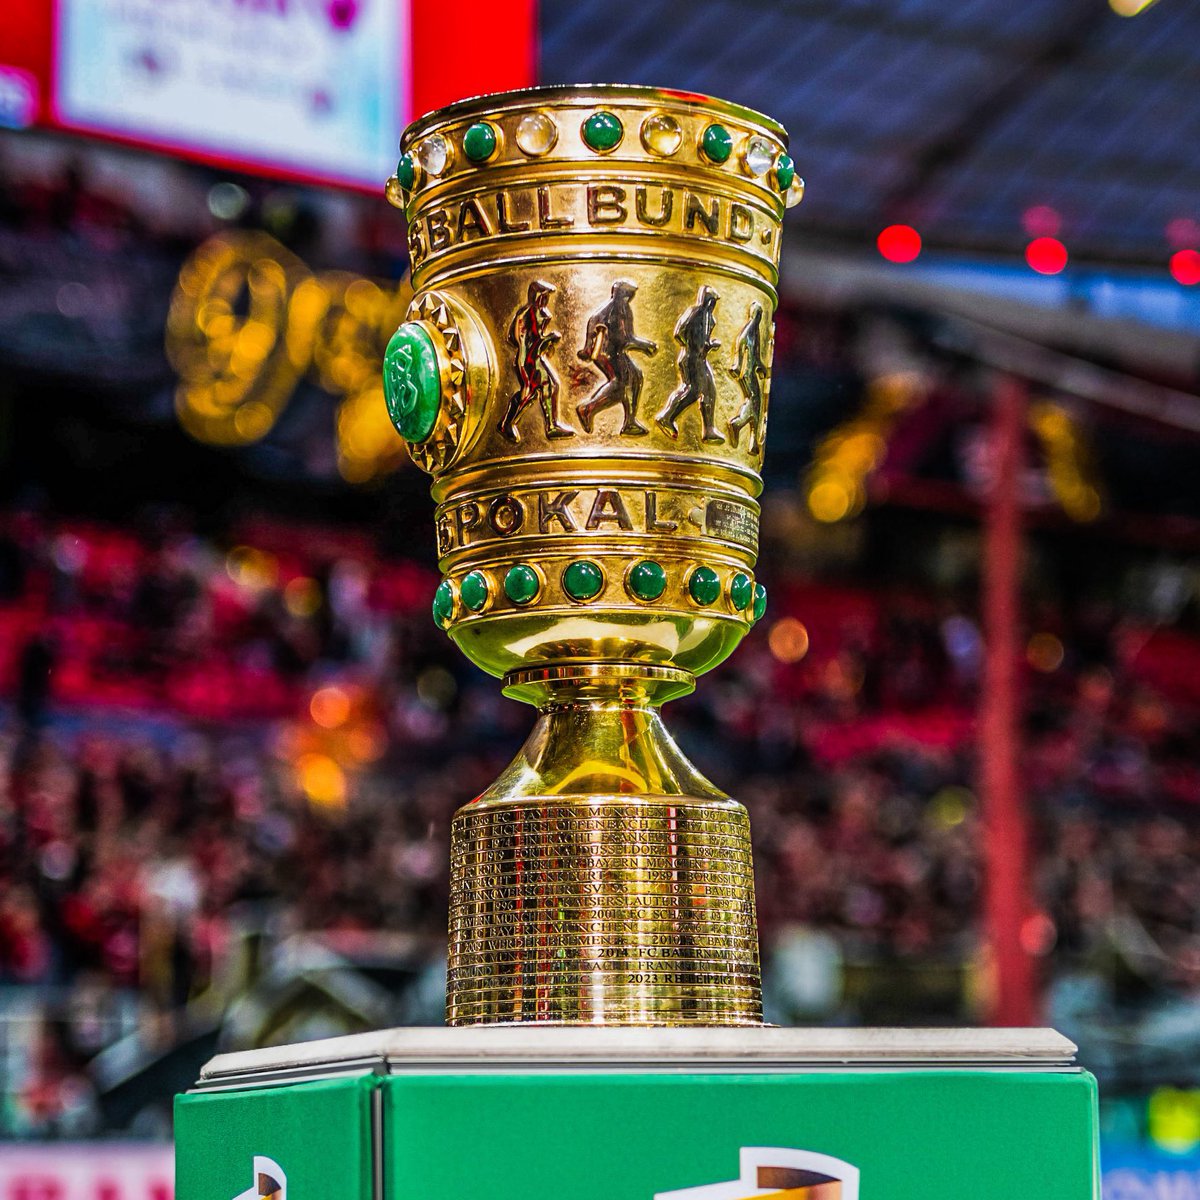 🏆🇩🇪 Bayer Leverkusen qualify to DFB Pokal final after their 40th consecutive game unbeaten.

The final will be at the Olympiastadion in Berlin vs Kaiserslautern.